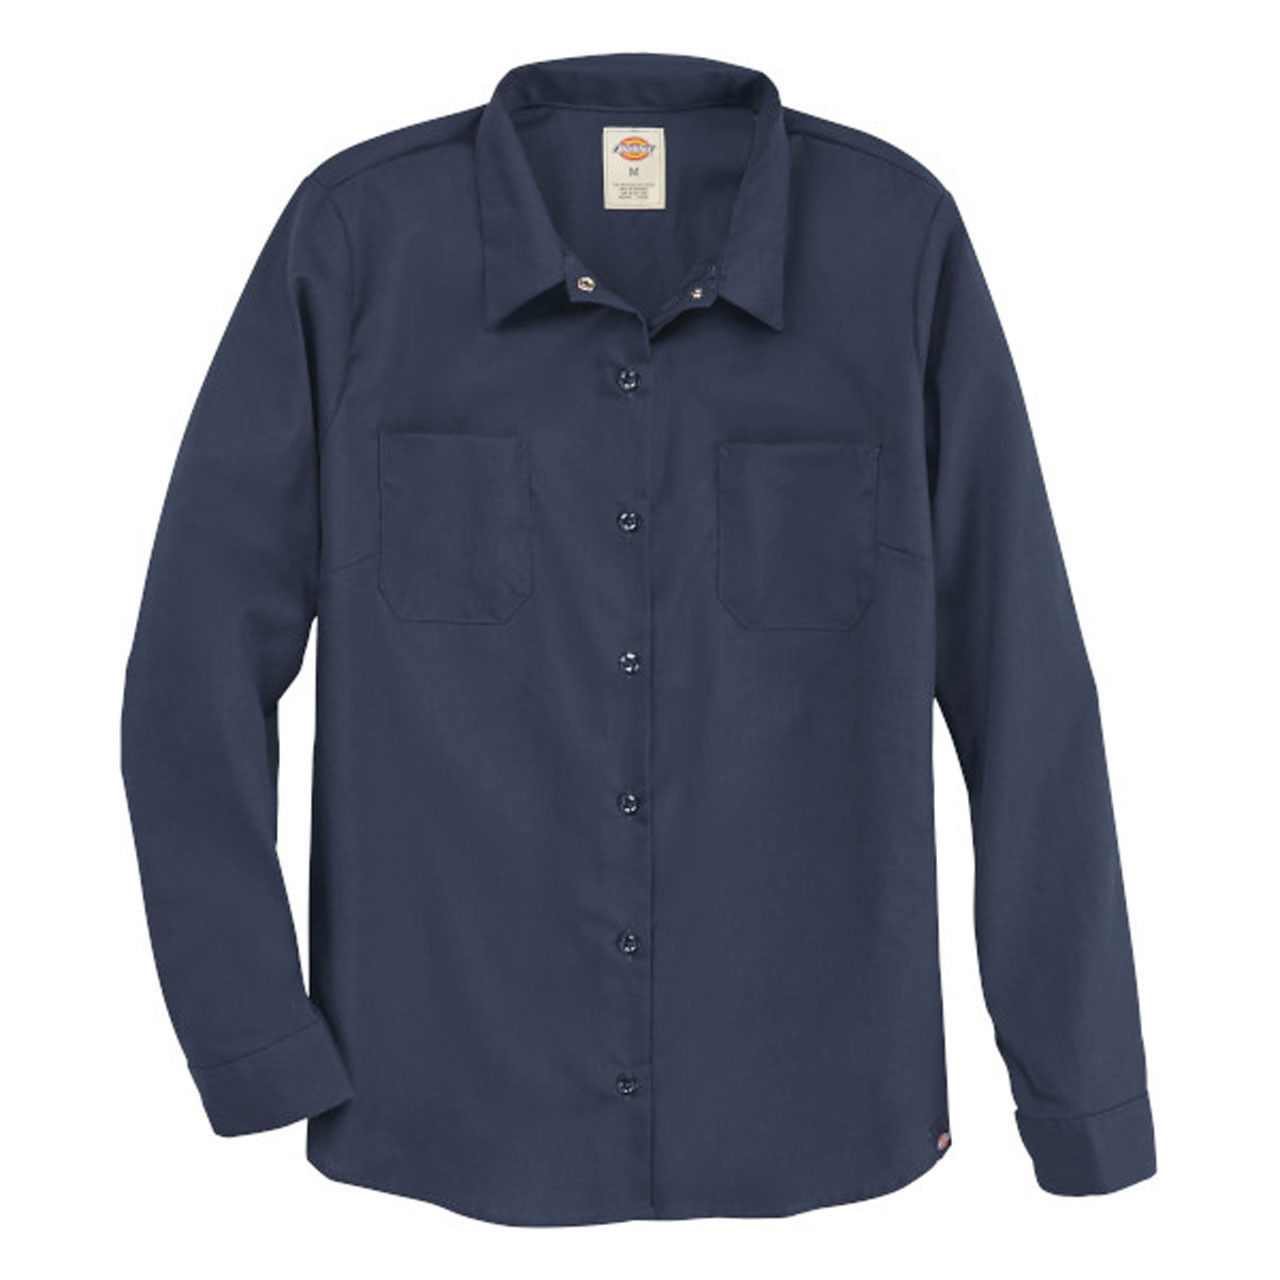 What material are the Dickie long sleeve shirts made of?